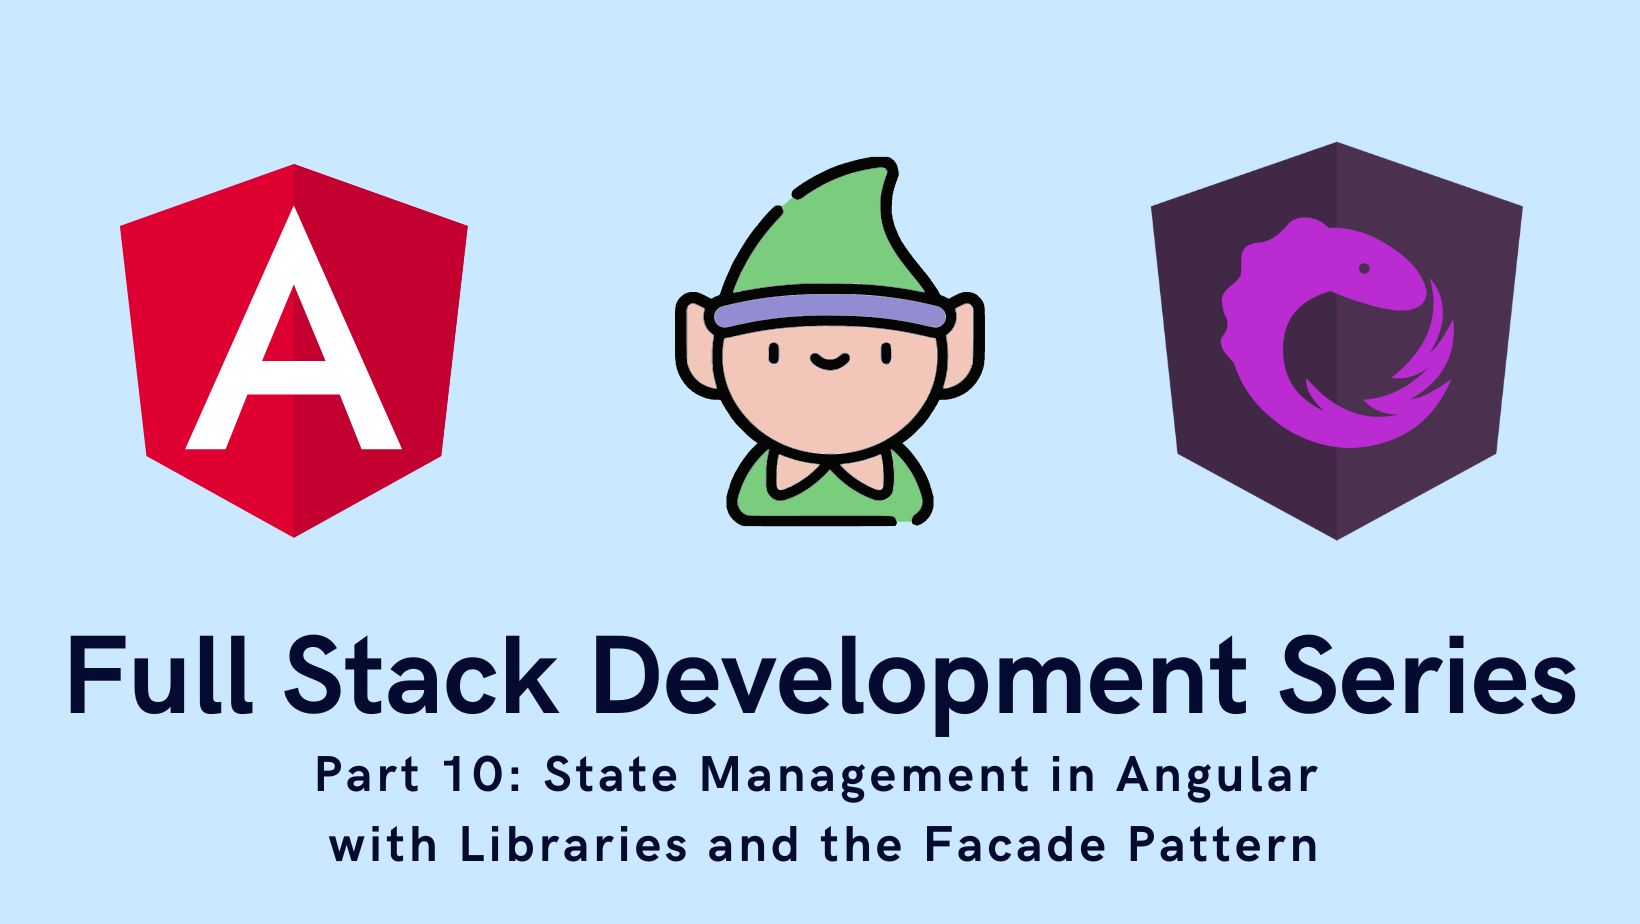 Full Stack Development Series Part 10: State Management in Angular with Libraries and the Facade Pattern